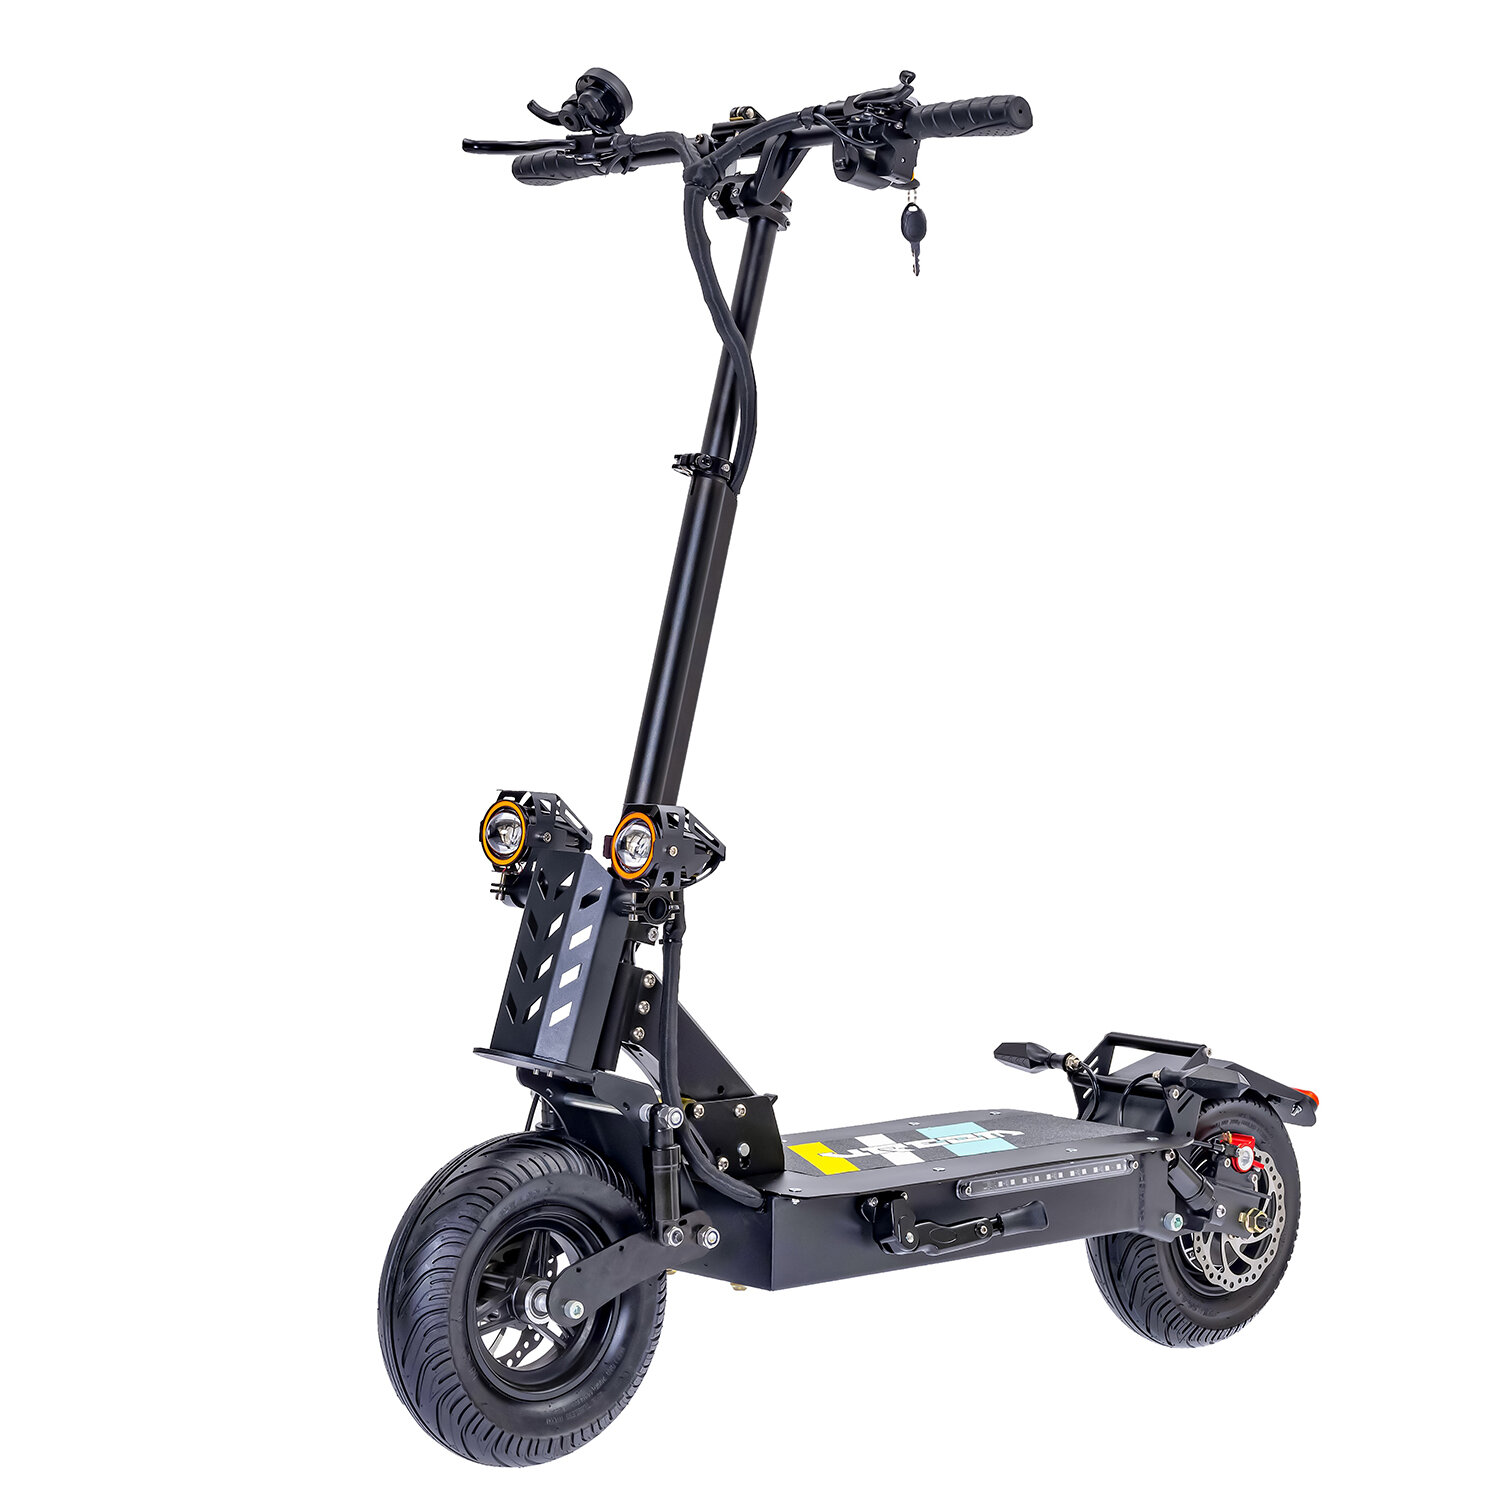 best price,vreom,t12,60v,16ah,1600w,oil,brake,inch,electric,scooter,discount